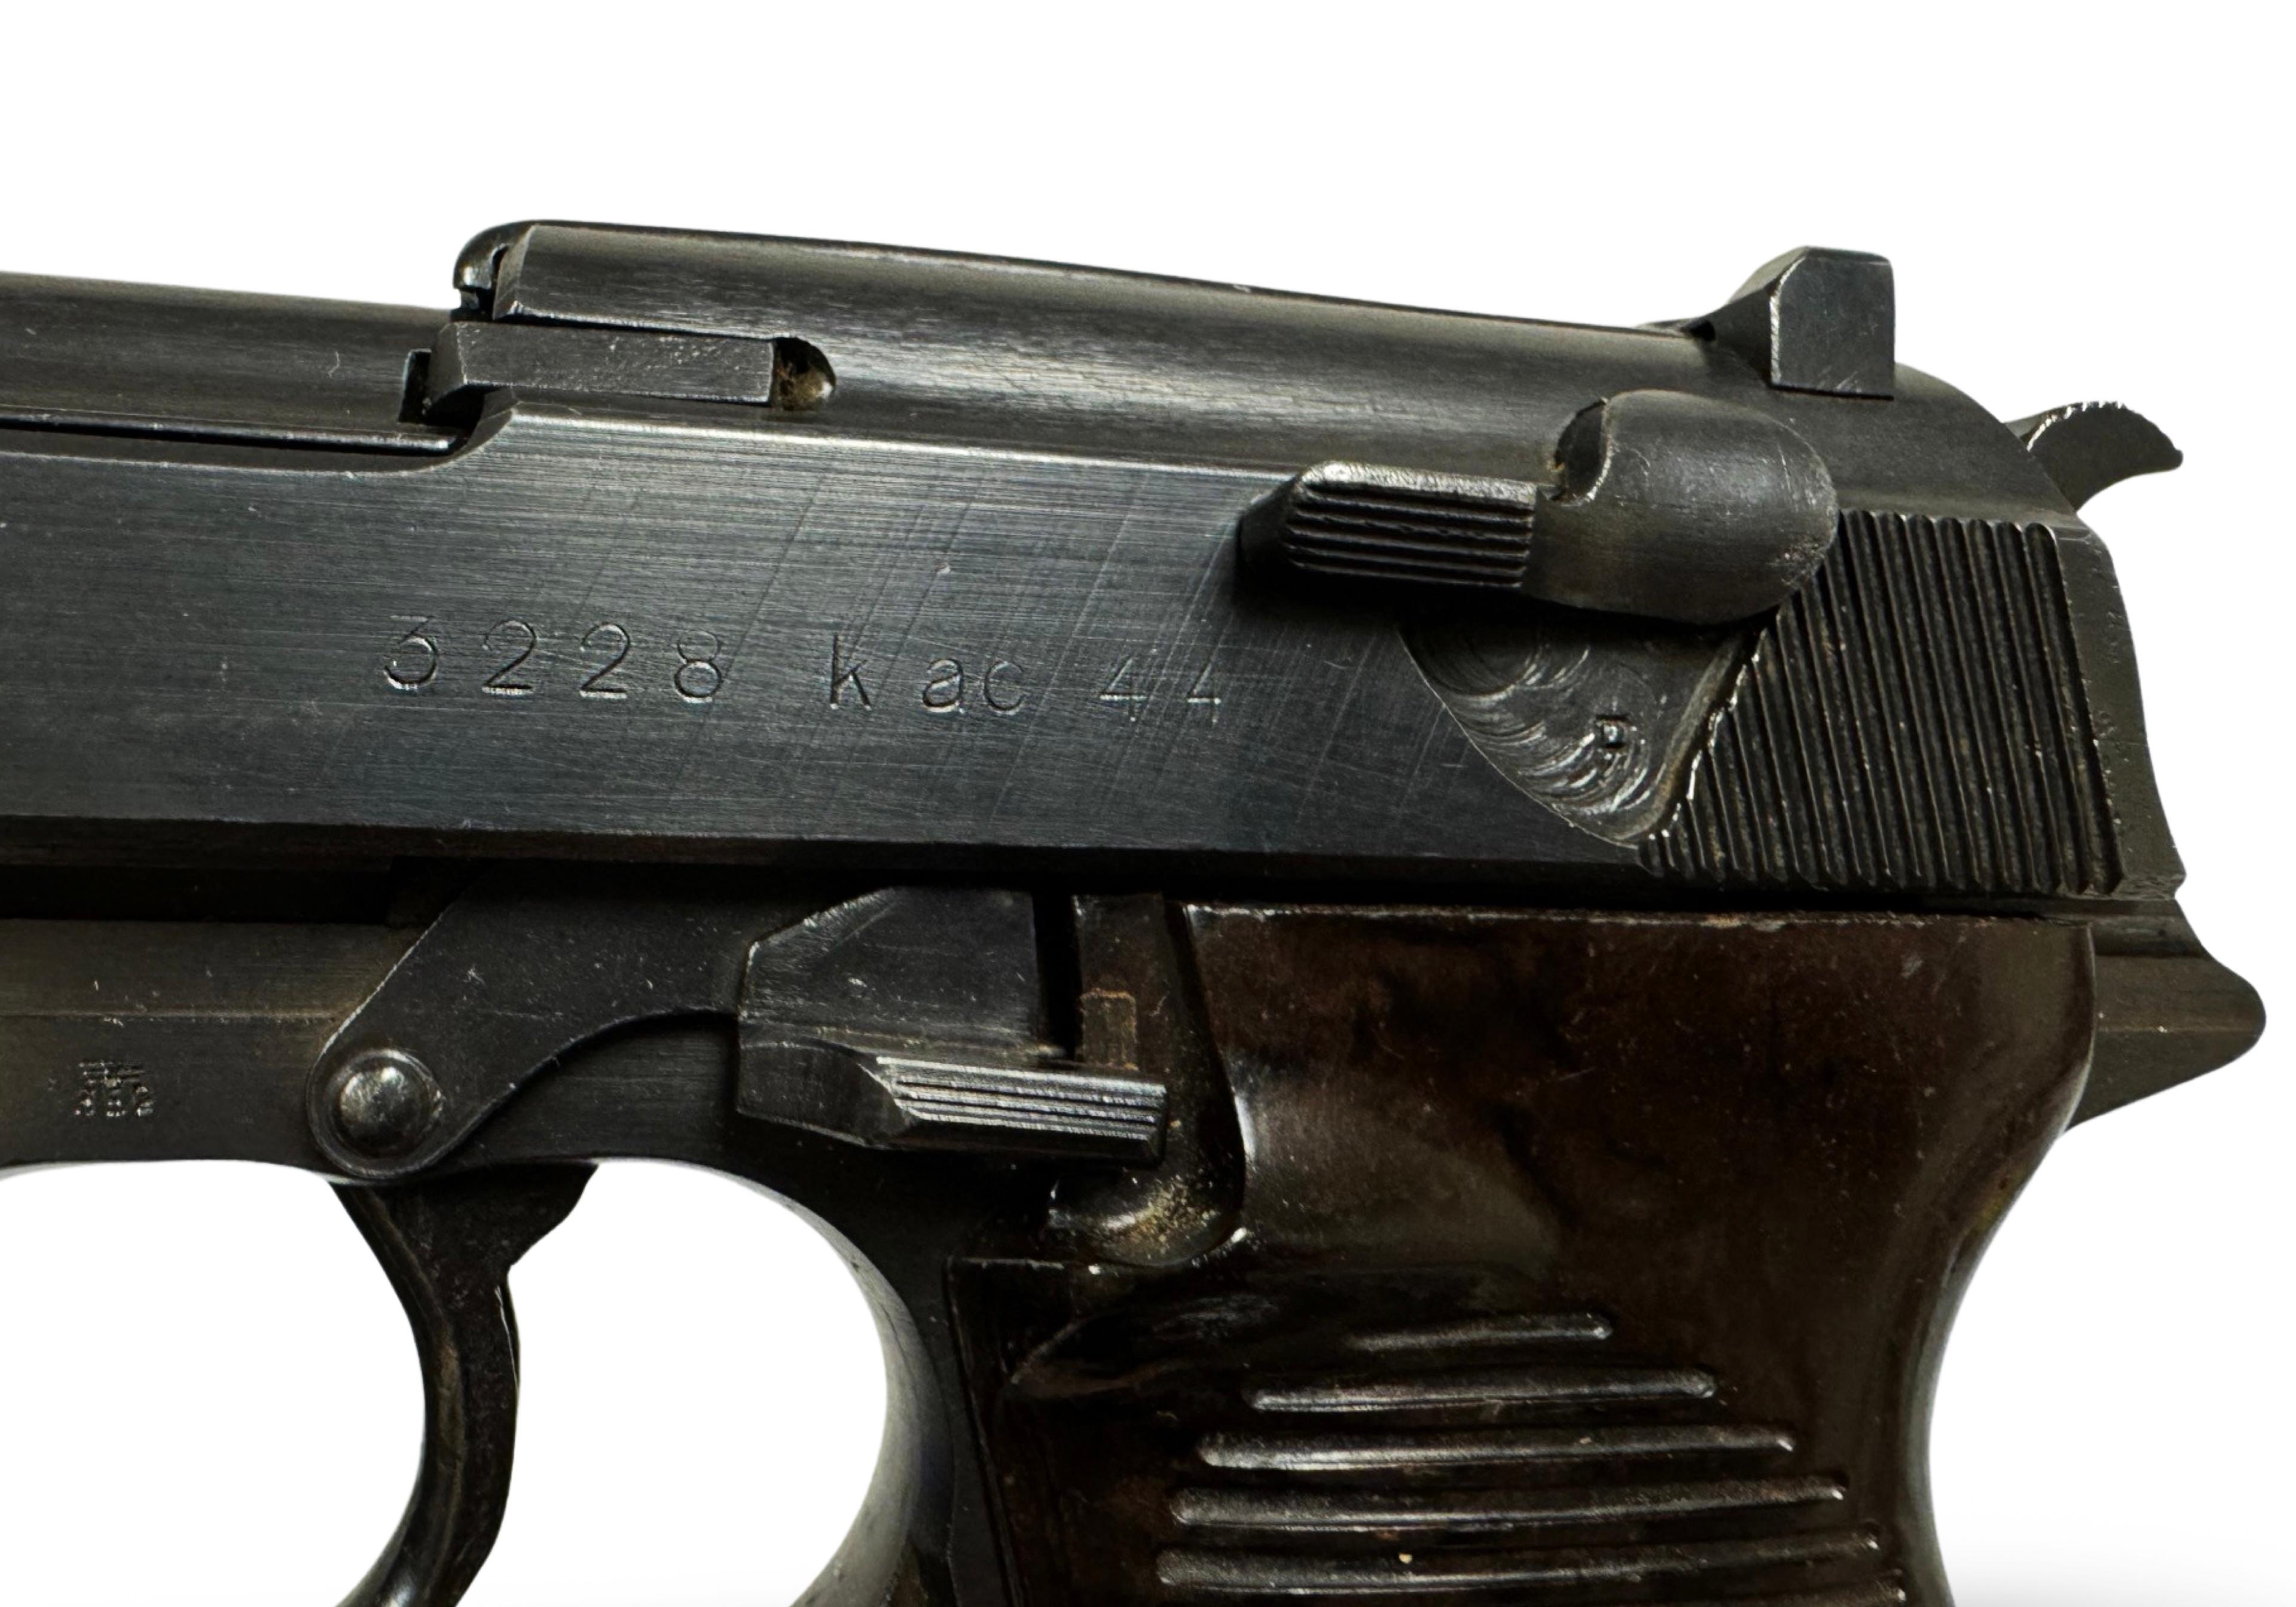 Excellent WWII German 1944 Walther P38 "ac44" 9mm Semi-Automatic Pistol